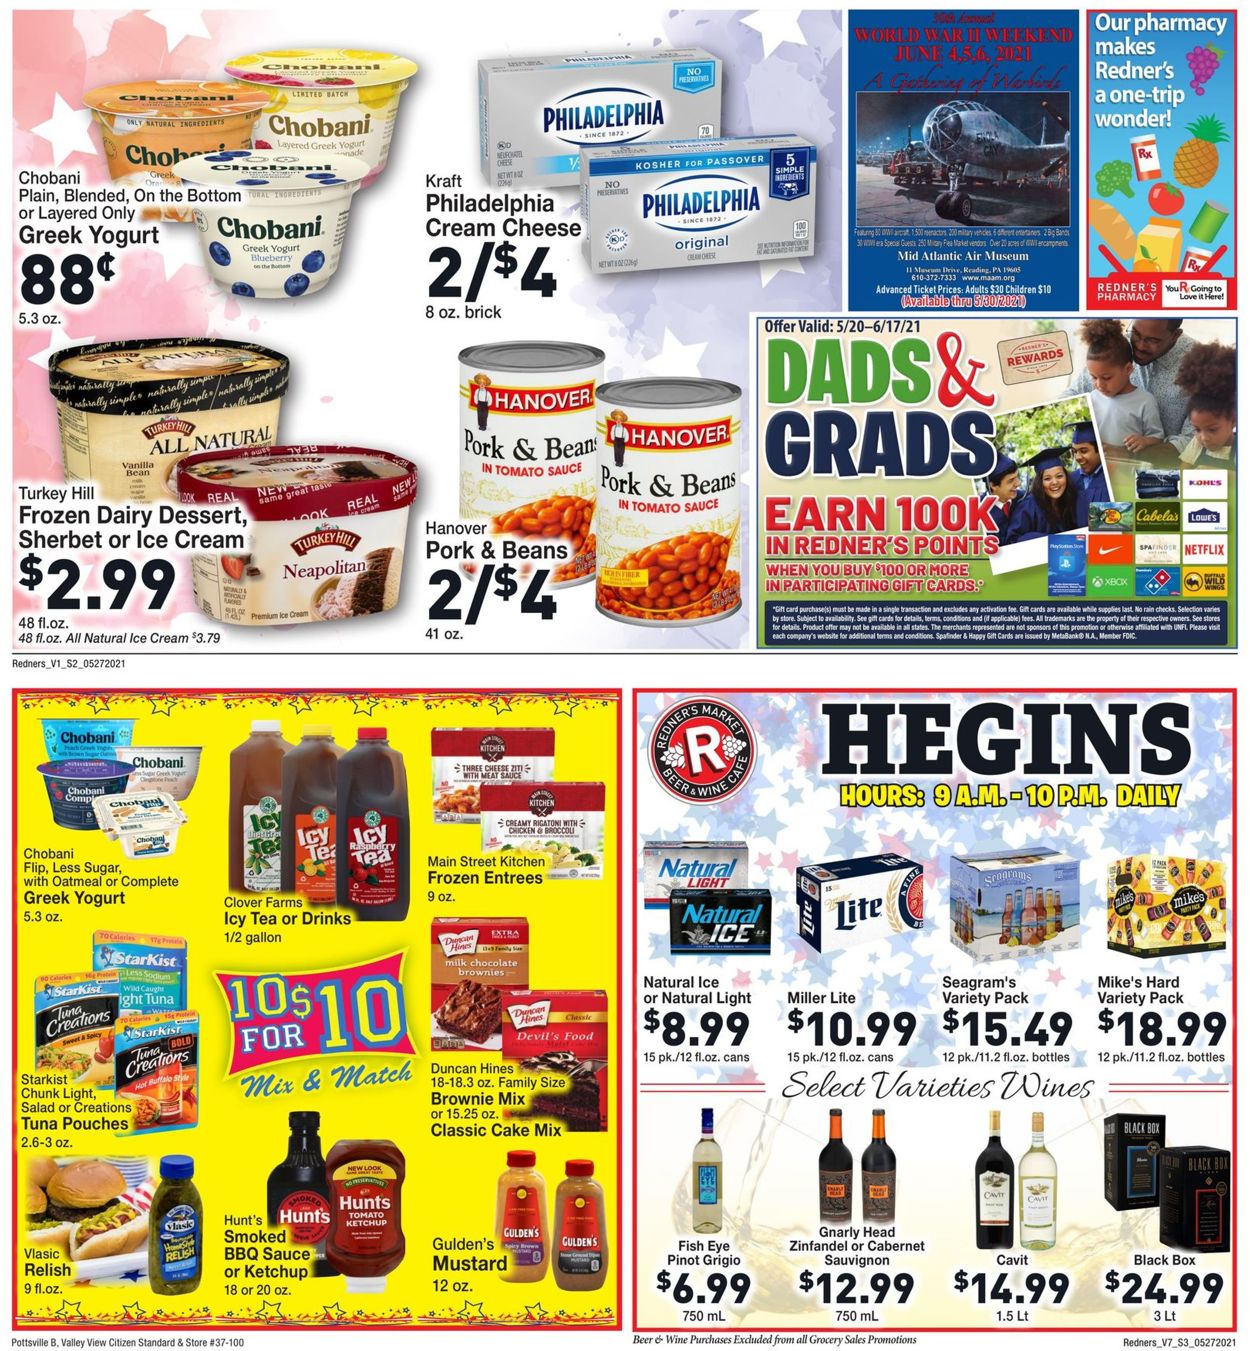 Catalogue Redner’s Warehouse Market from 05/27/2021